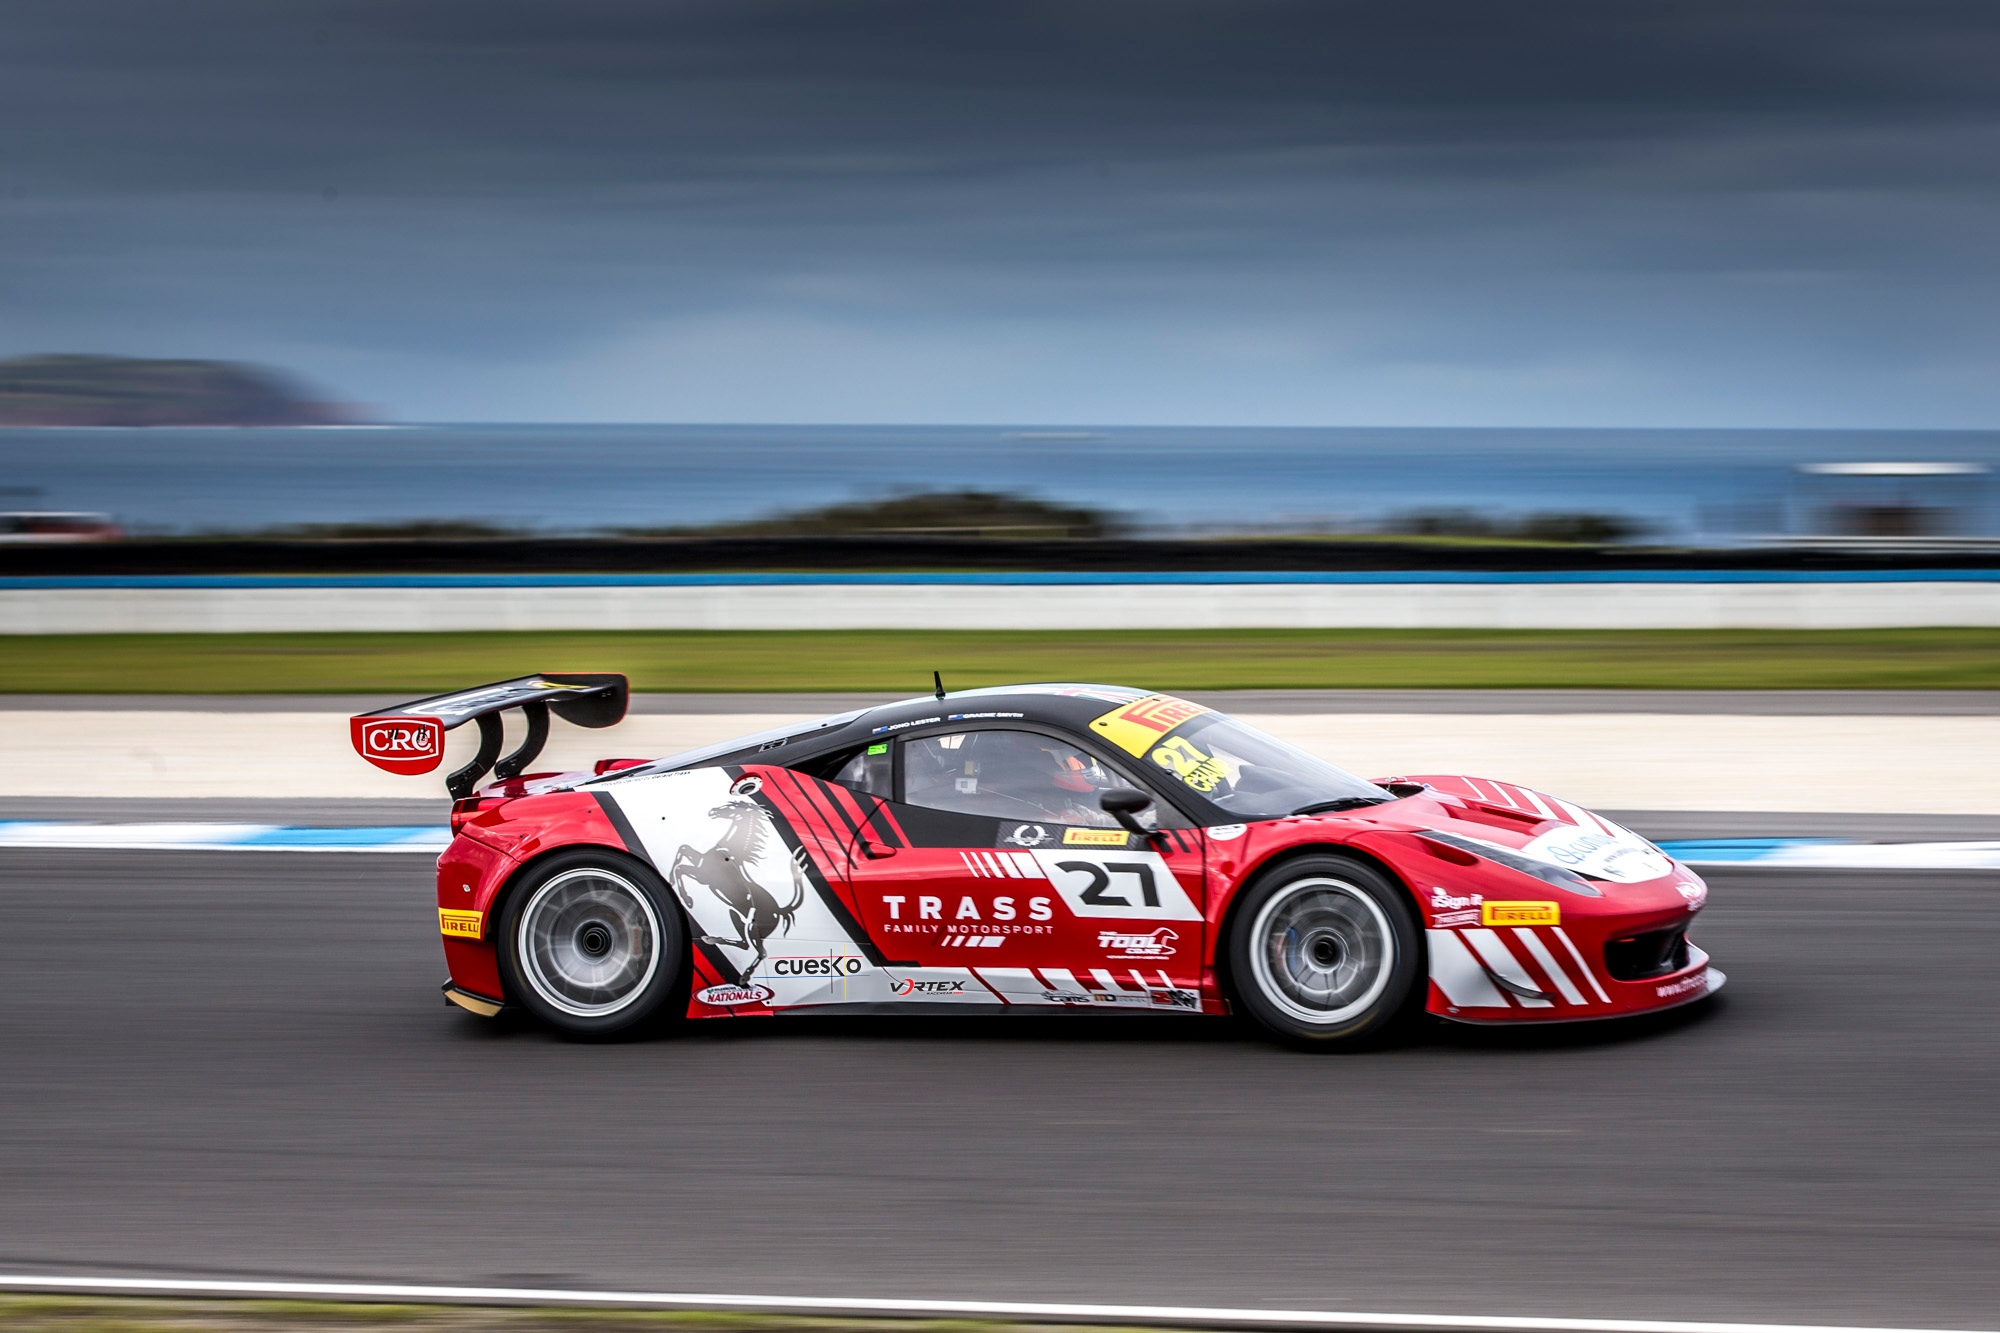 Local backing locked in for TFM Ferrari team at Highlands 101